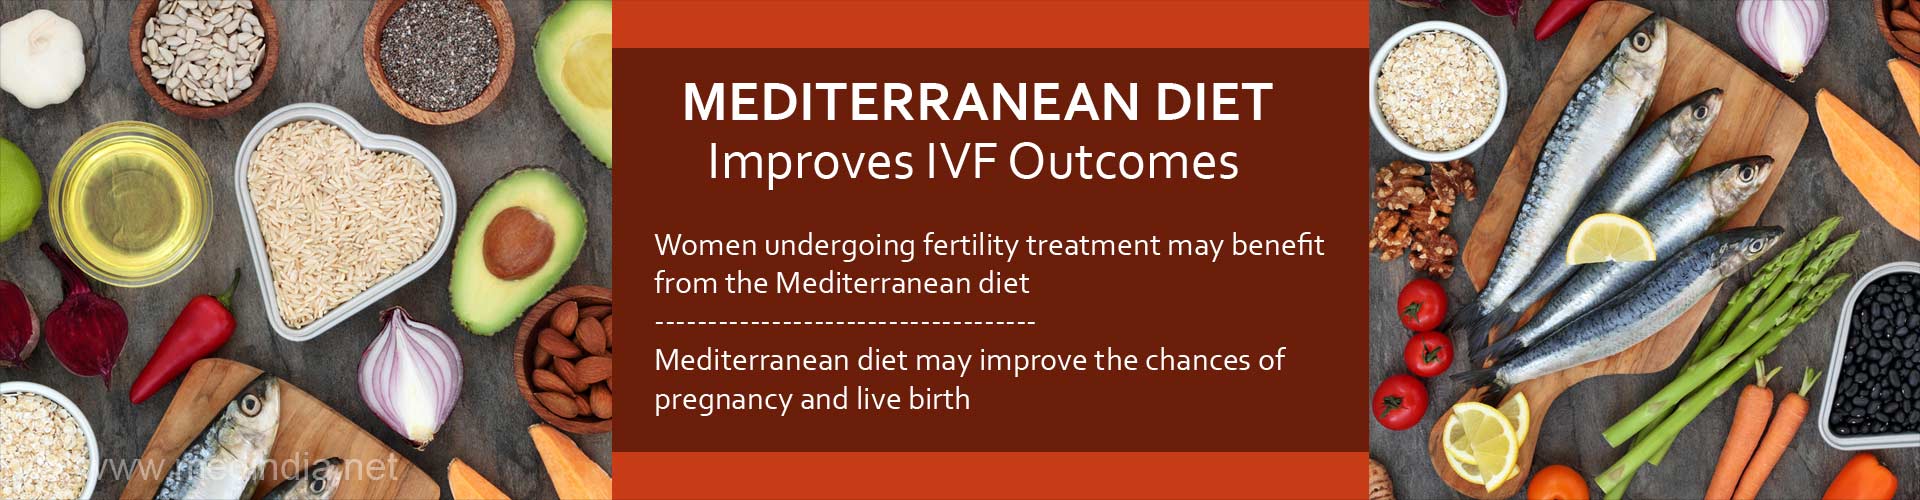 mediterranean diet improves IVF outcomes
-women undergoing fertility treatment may benefit from the mediterranean diet
- mediterranean diet may improve the chances of pregnancy and live birth